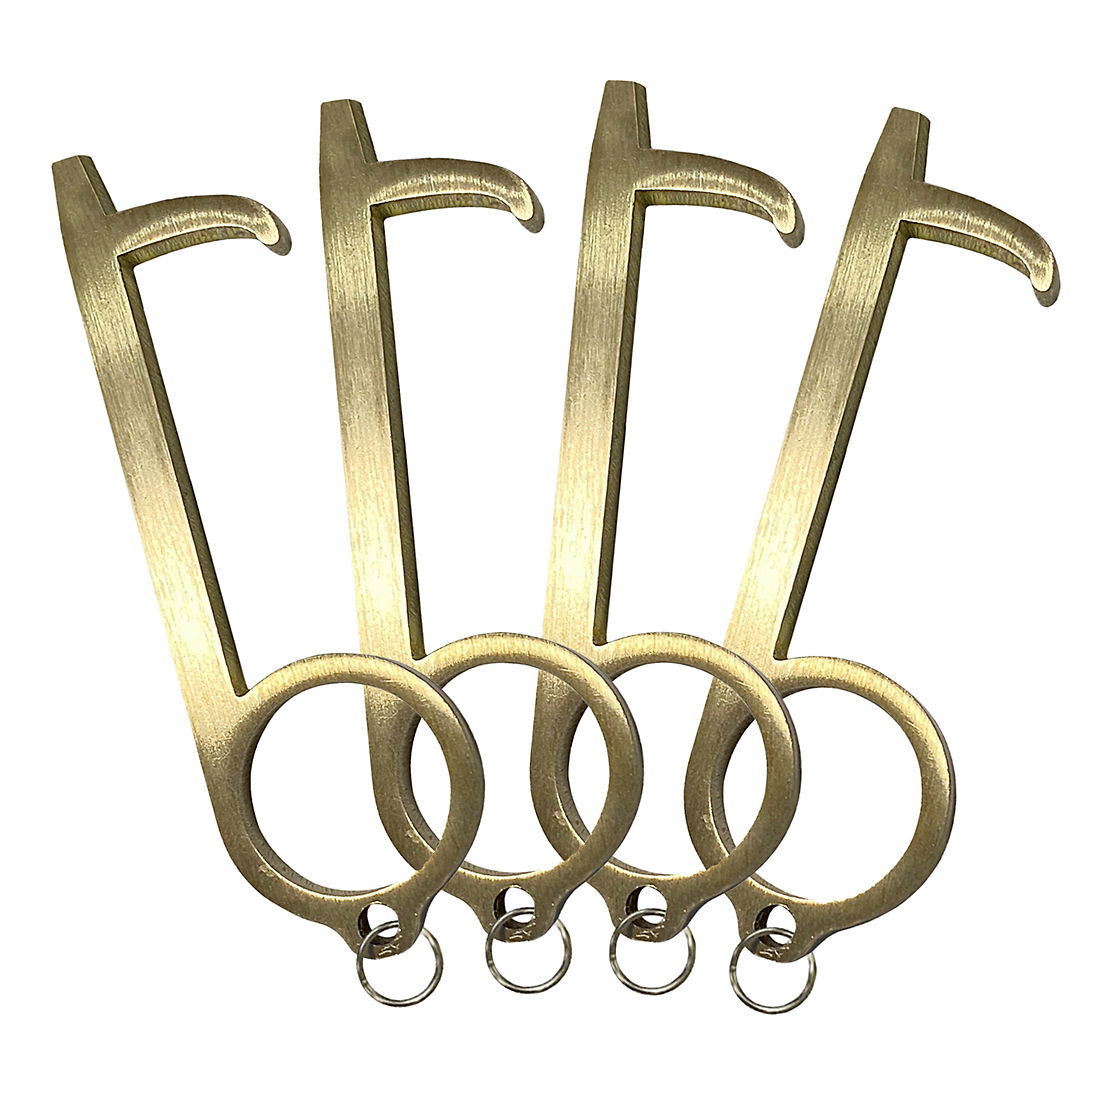 4 Pack FREE SHIPPING! HY-GENIE Brass No Touch Hand Tool 